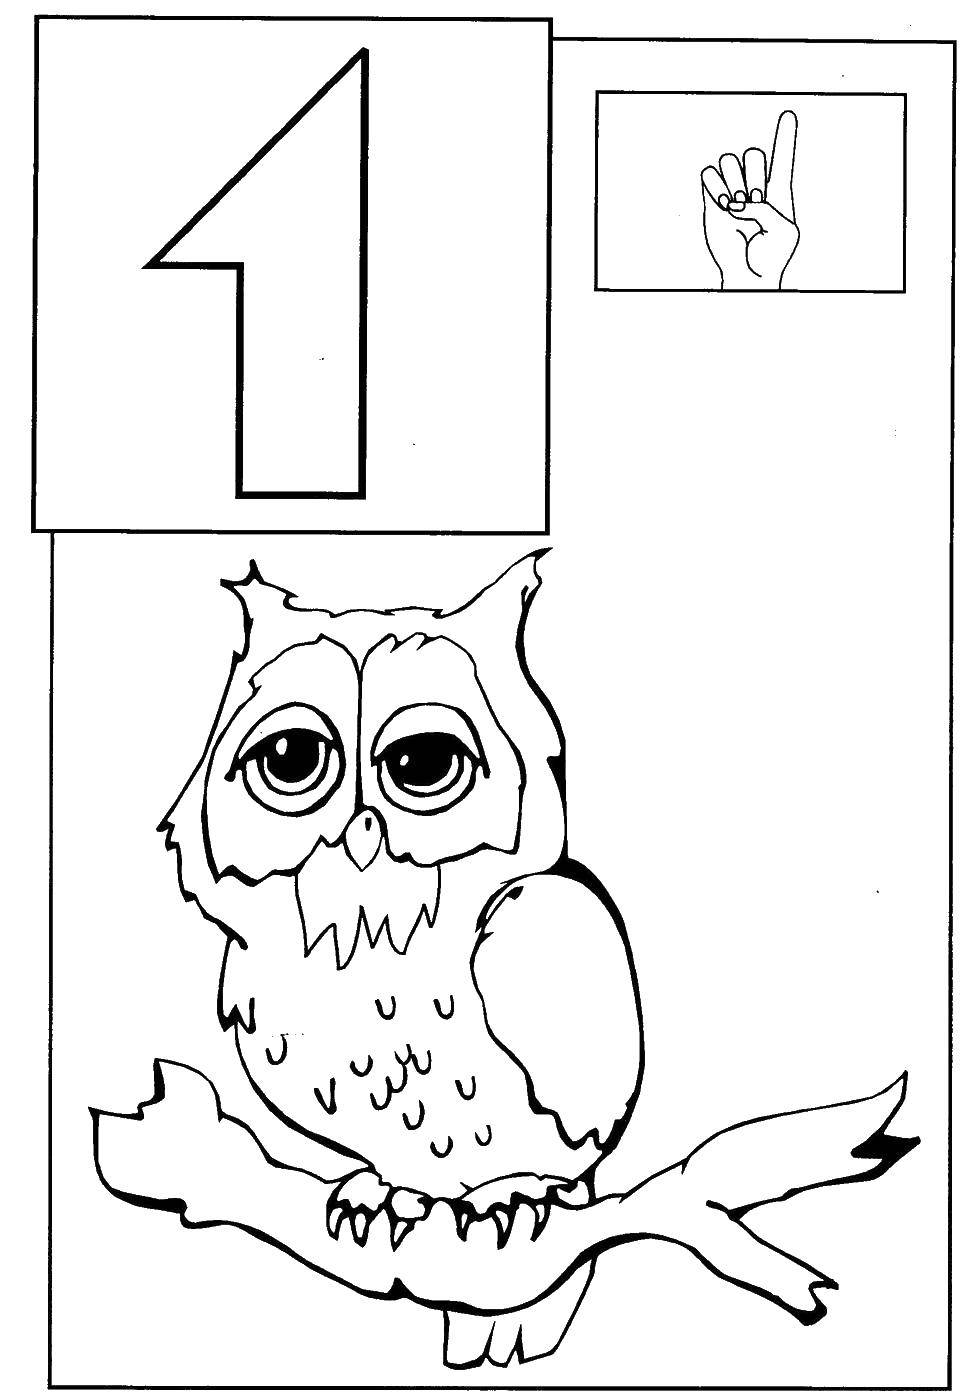 Coloring One owl. Category Learn to count. Tags:  Numbers , account numbers.